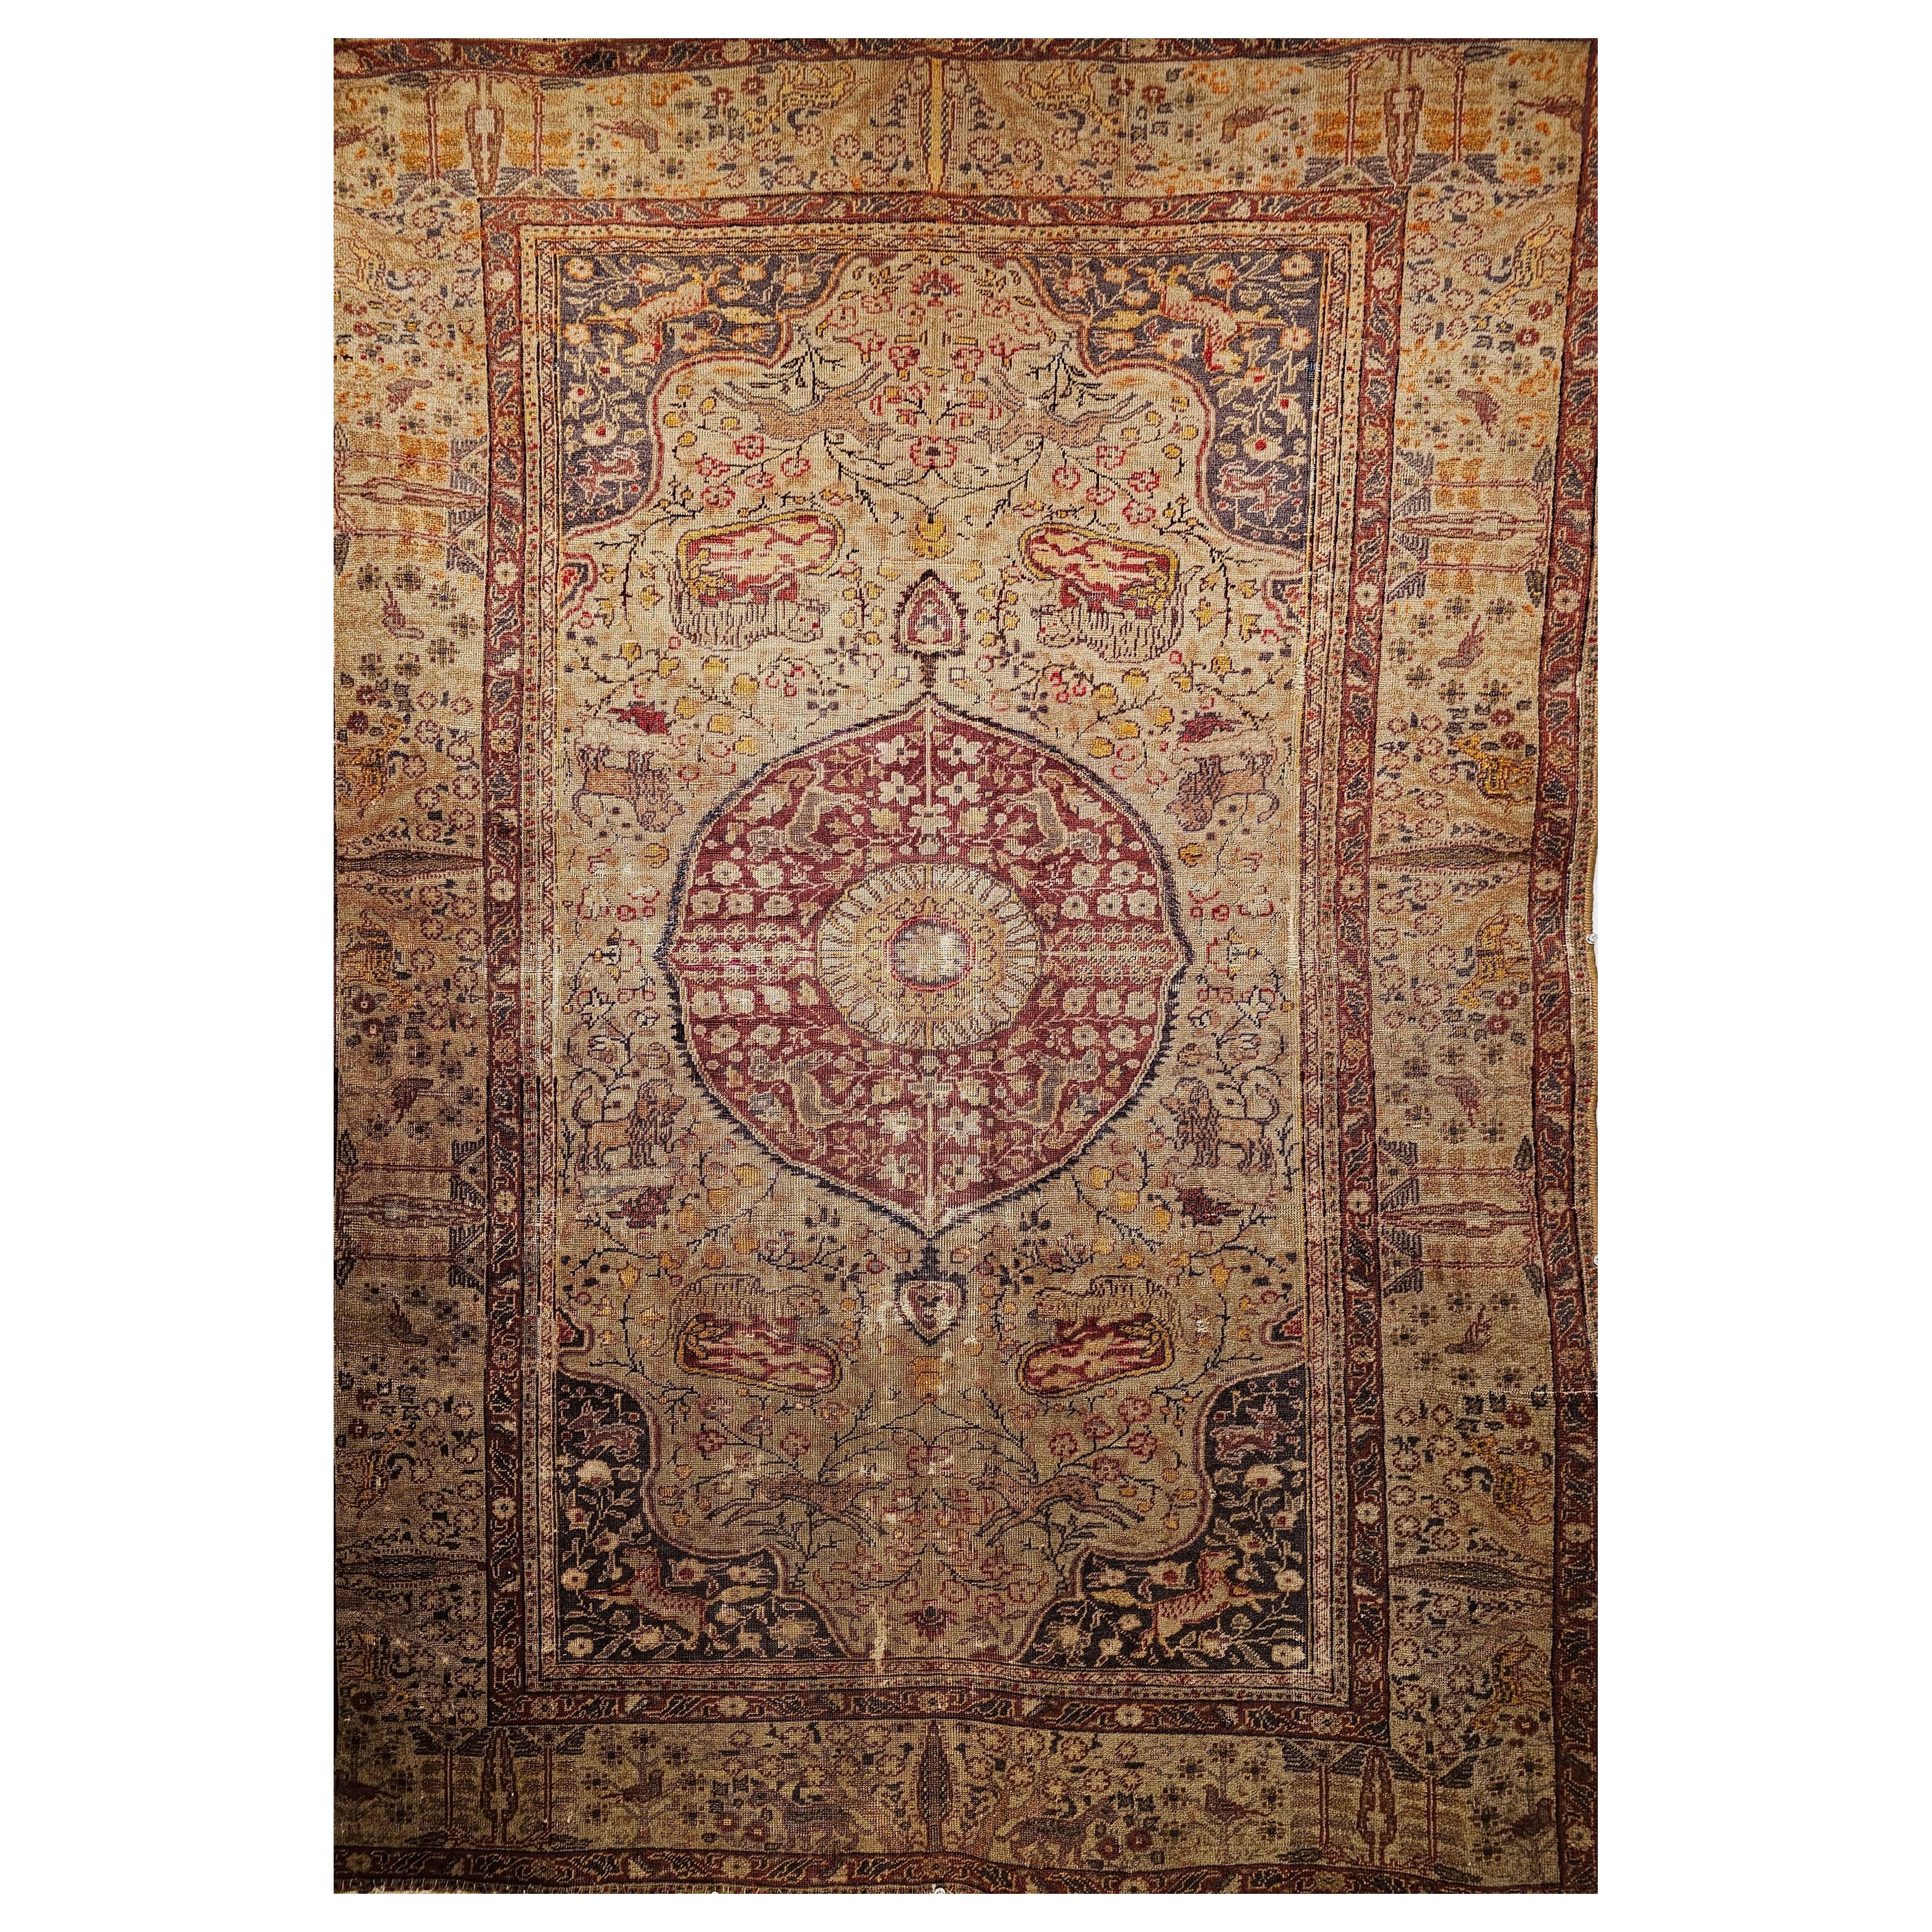 19th Century Turkish Sivas with Floral and Fauna in Camel, Lavender, Red Colors